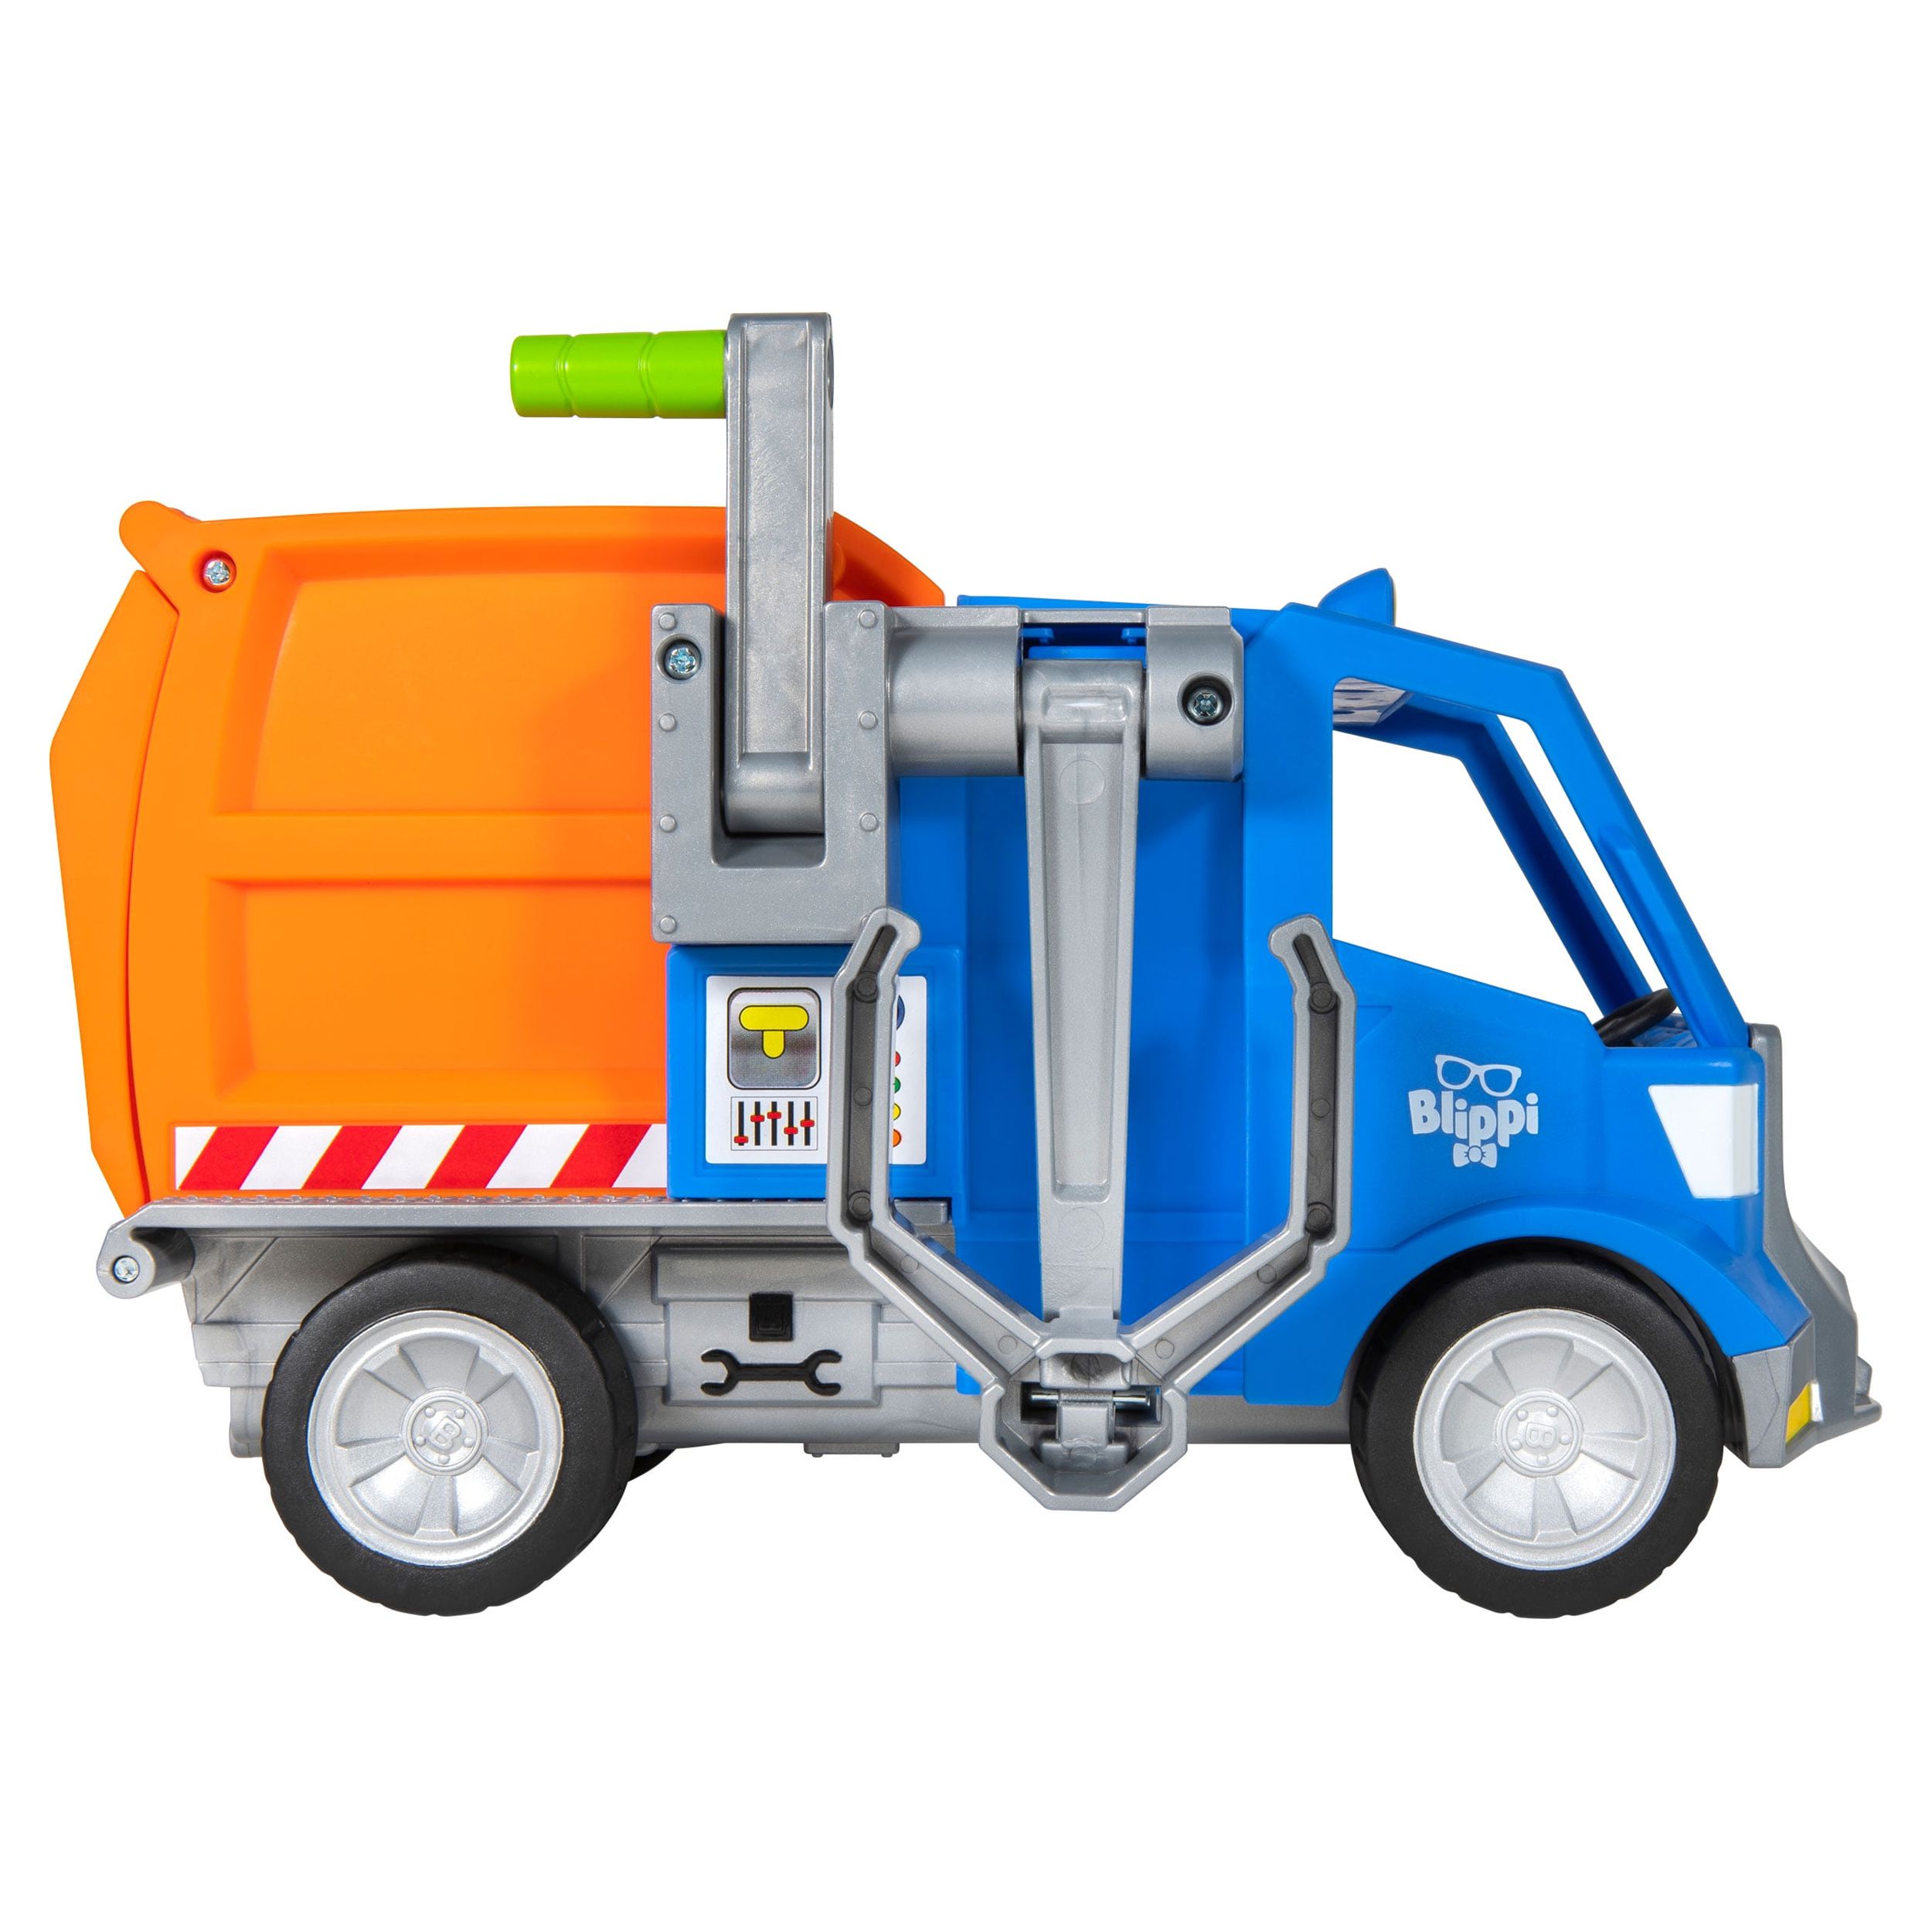 BLIPPI Recycling Truck Play Vehicle - image 14 of 18